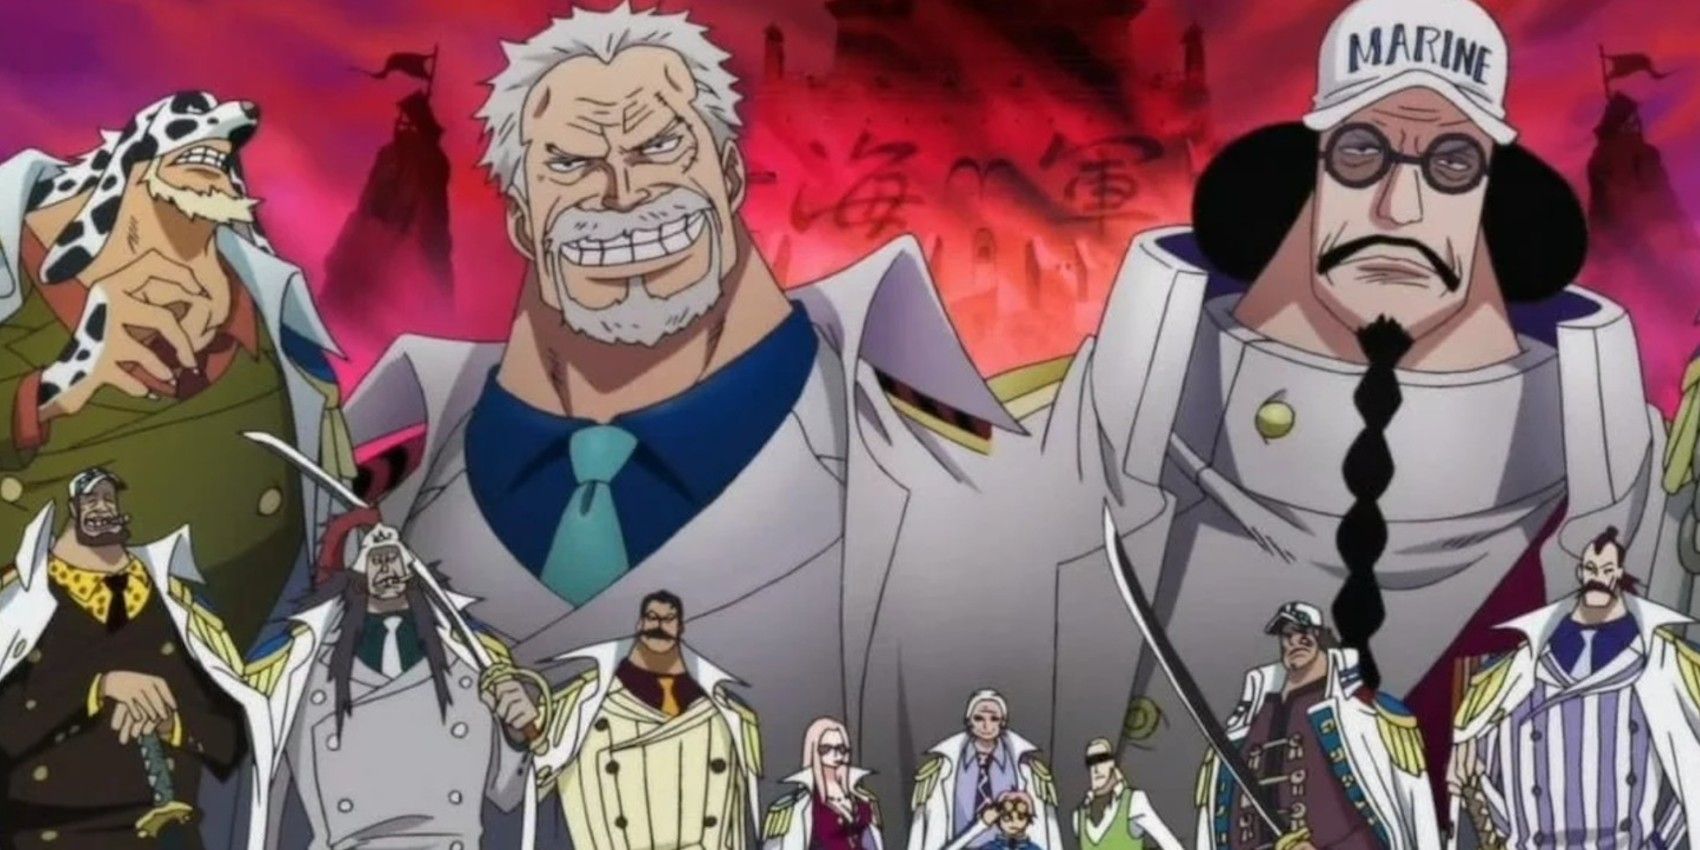 the marines from one piece